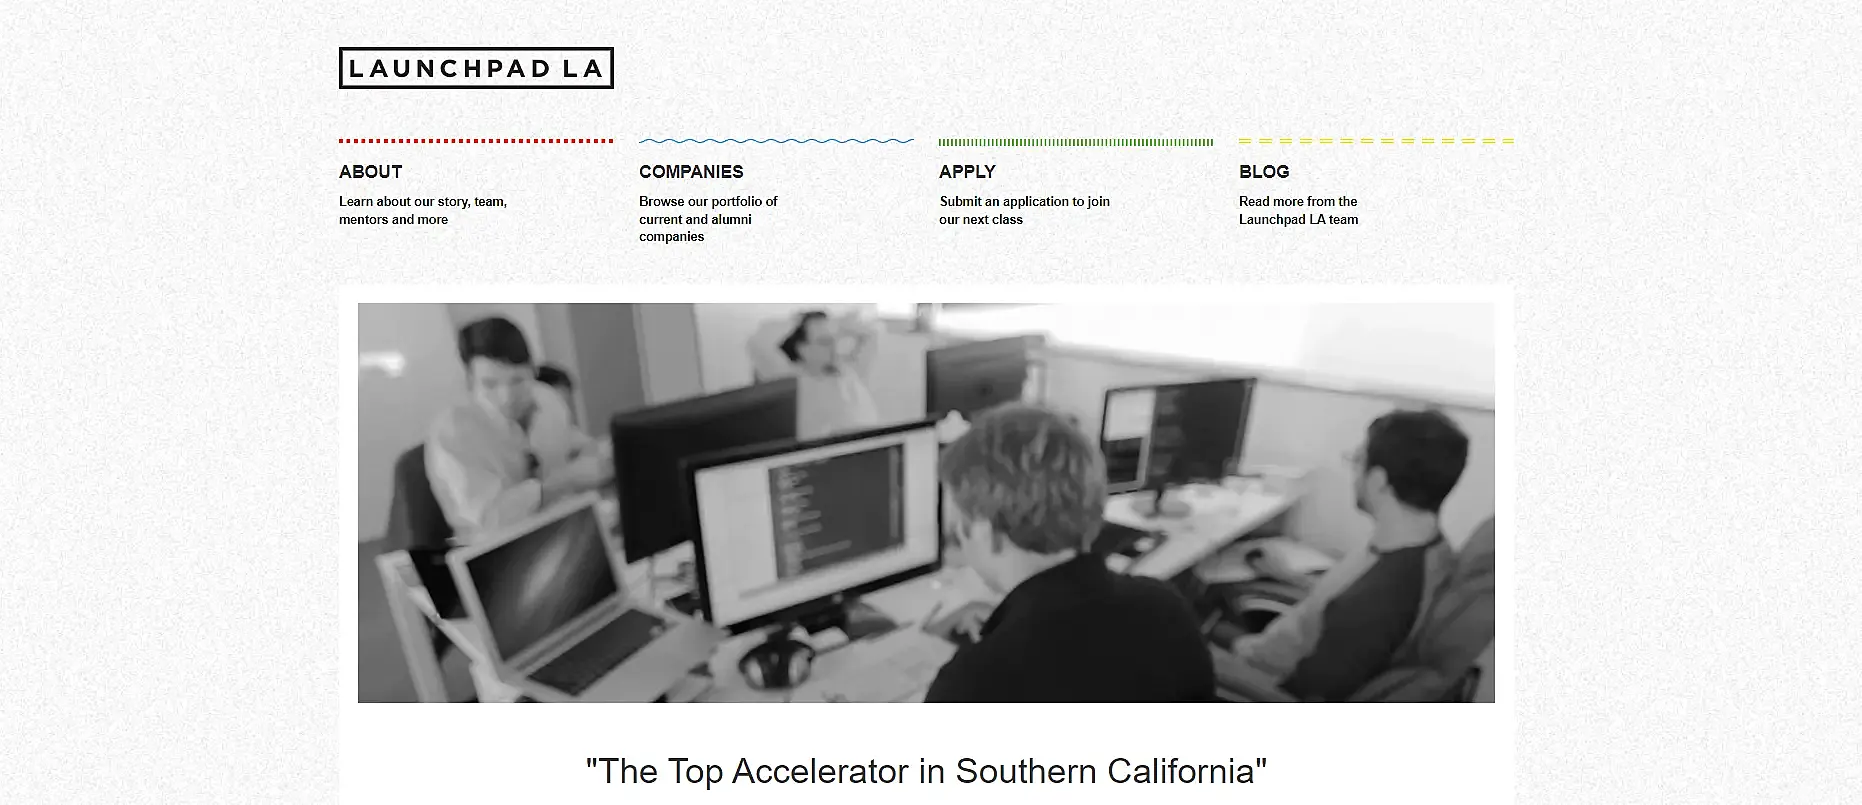 LaunchPad LA - One of the top startup accelerators